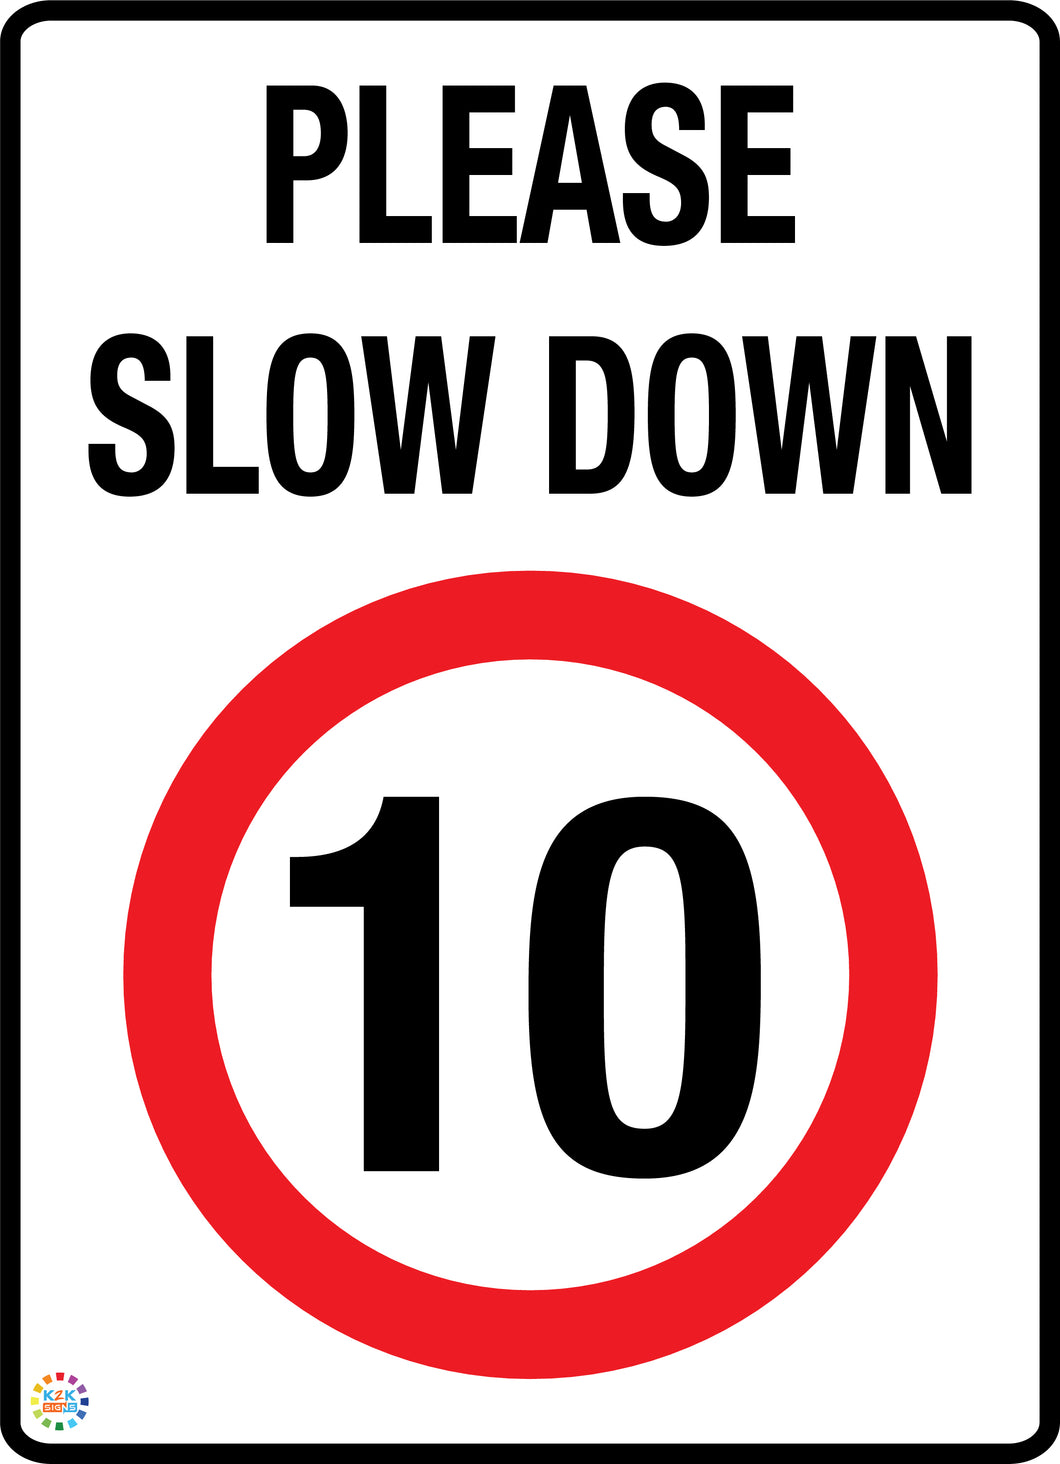 Please Slow Down - Speed Limit 10 Kph Sign